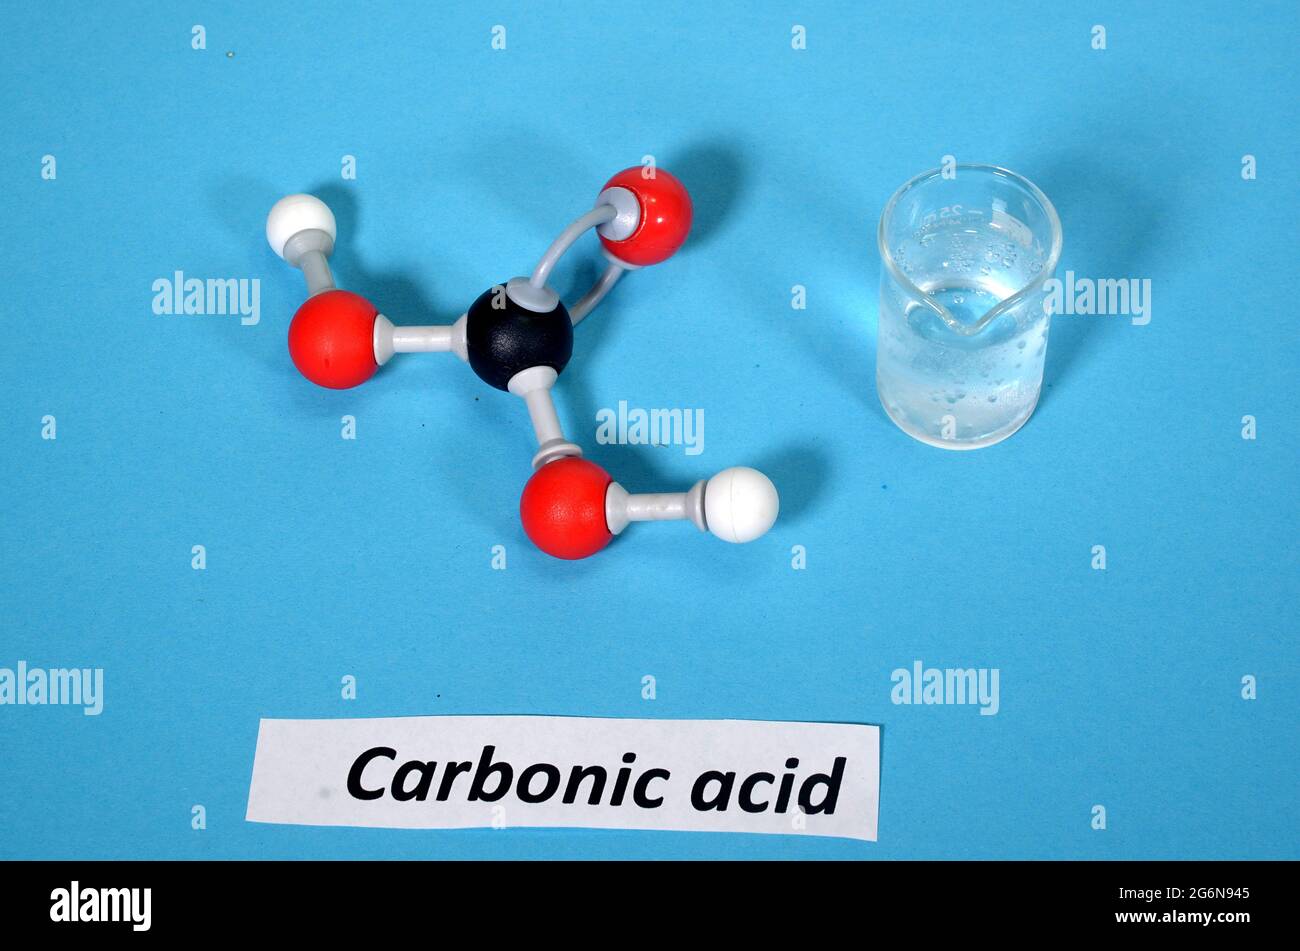 Molecule model of Carbonic Acid along with sample in a beaker. White is hydrogen, black is carbon, and red is oxygen. Stock Photo